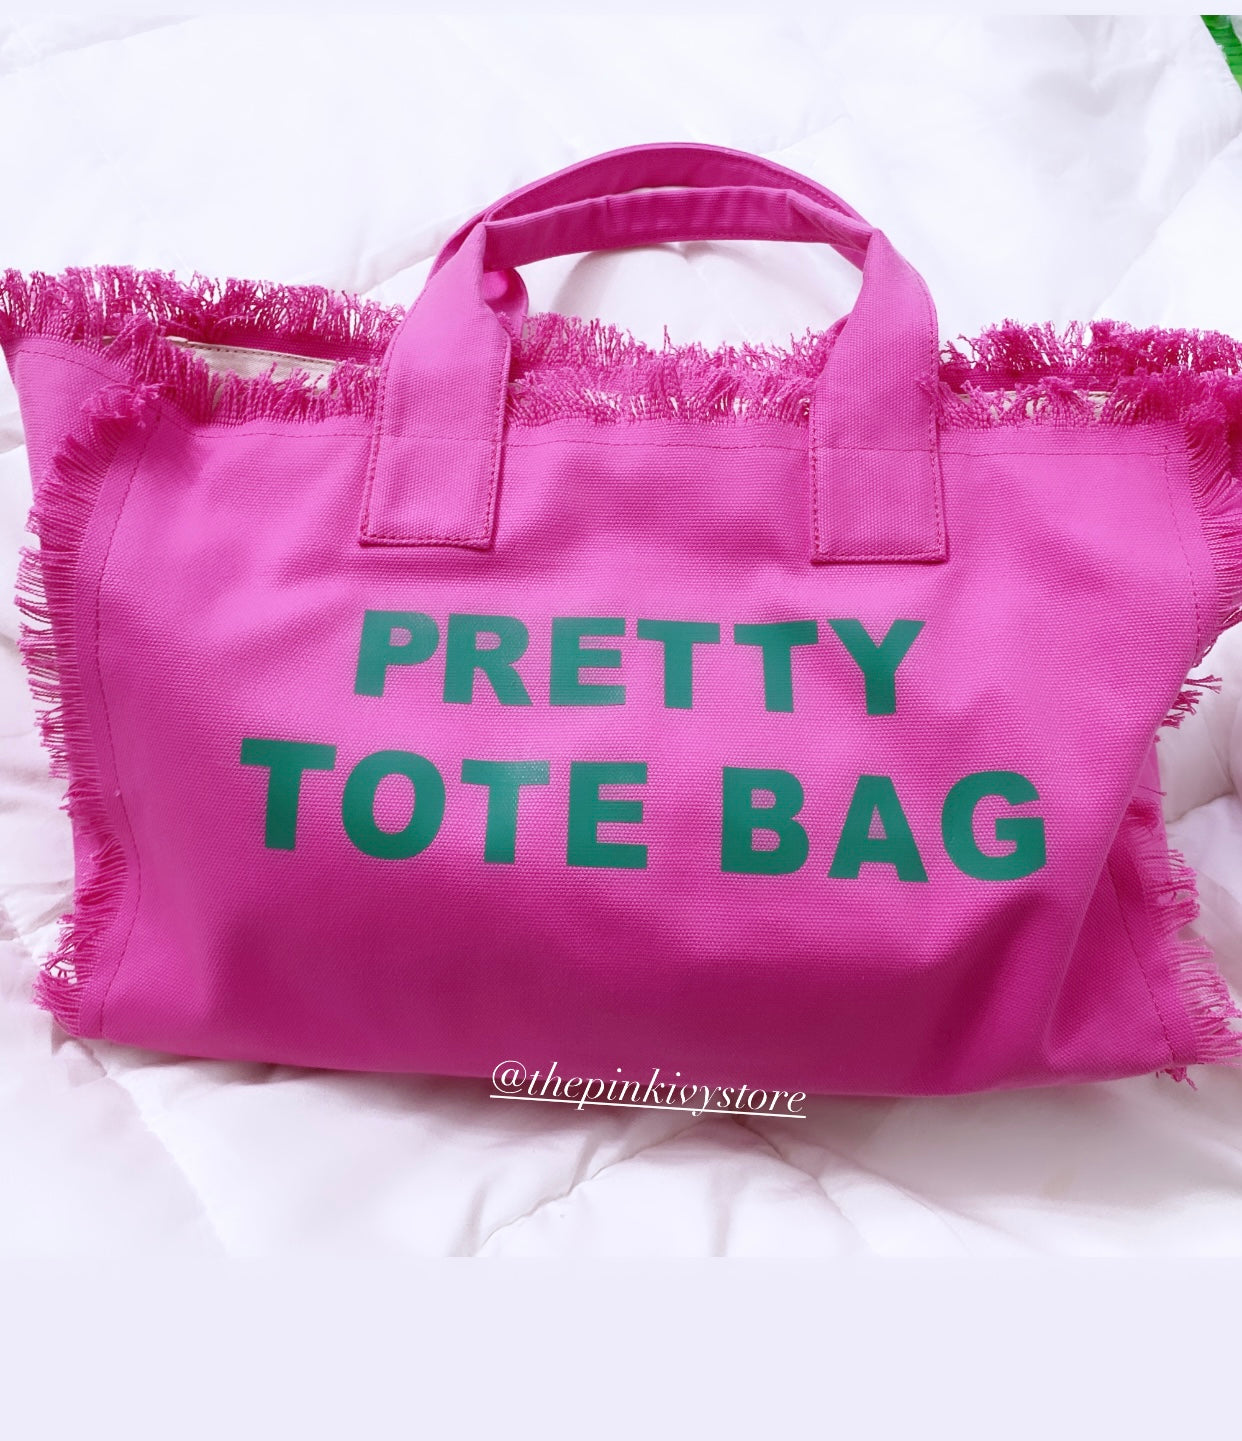 Pink Alpha Kappa Alpha sorority inspired pretty tote bag available at The Pink Ivy Store